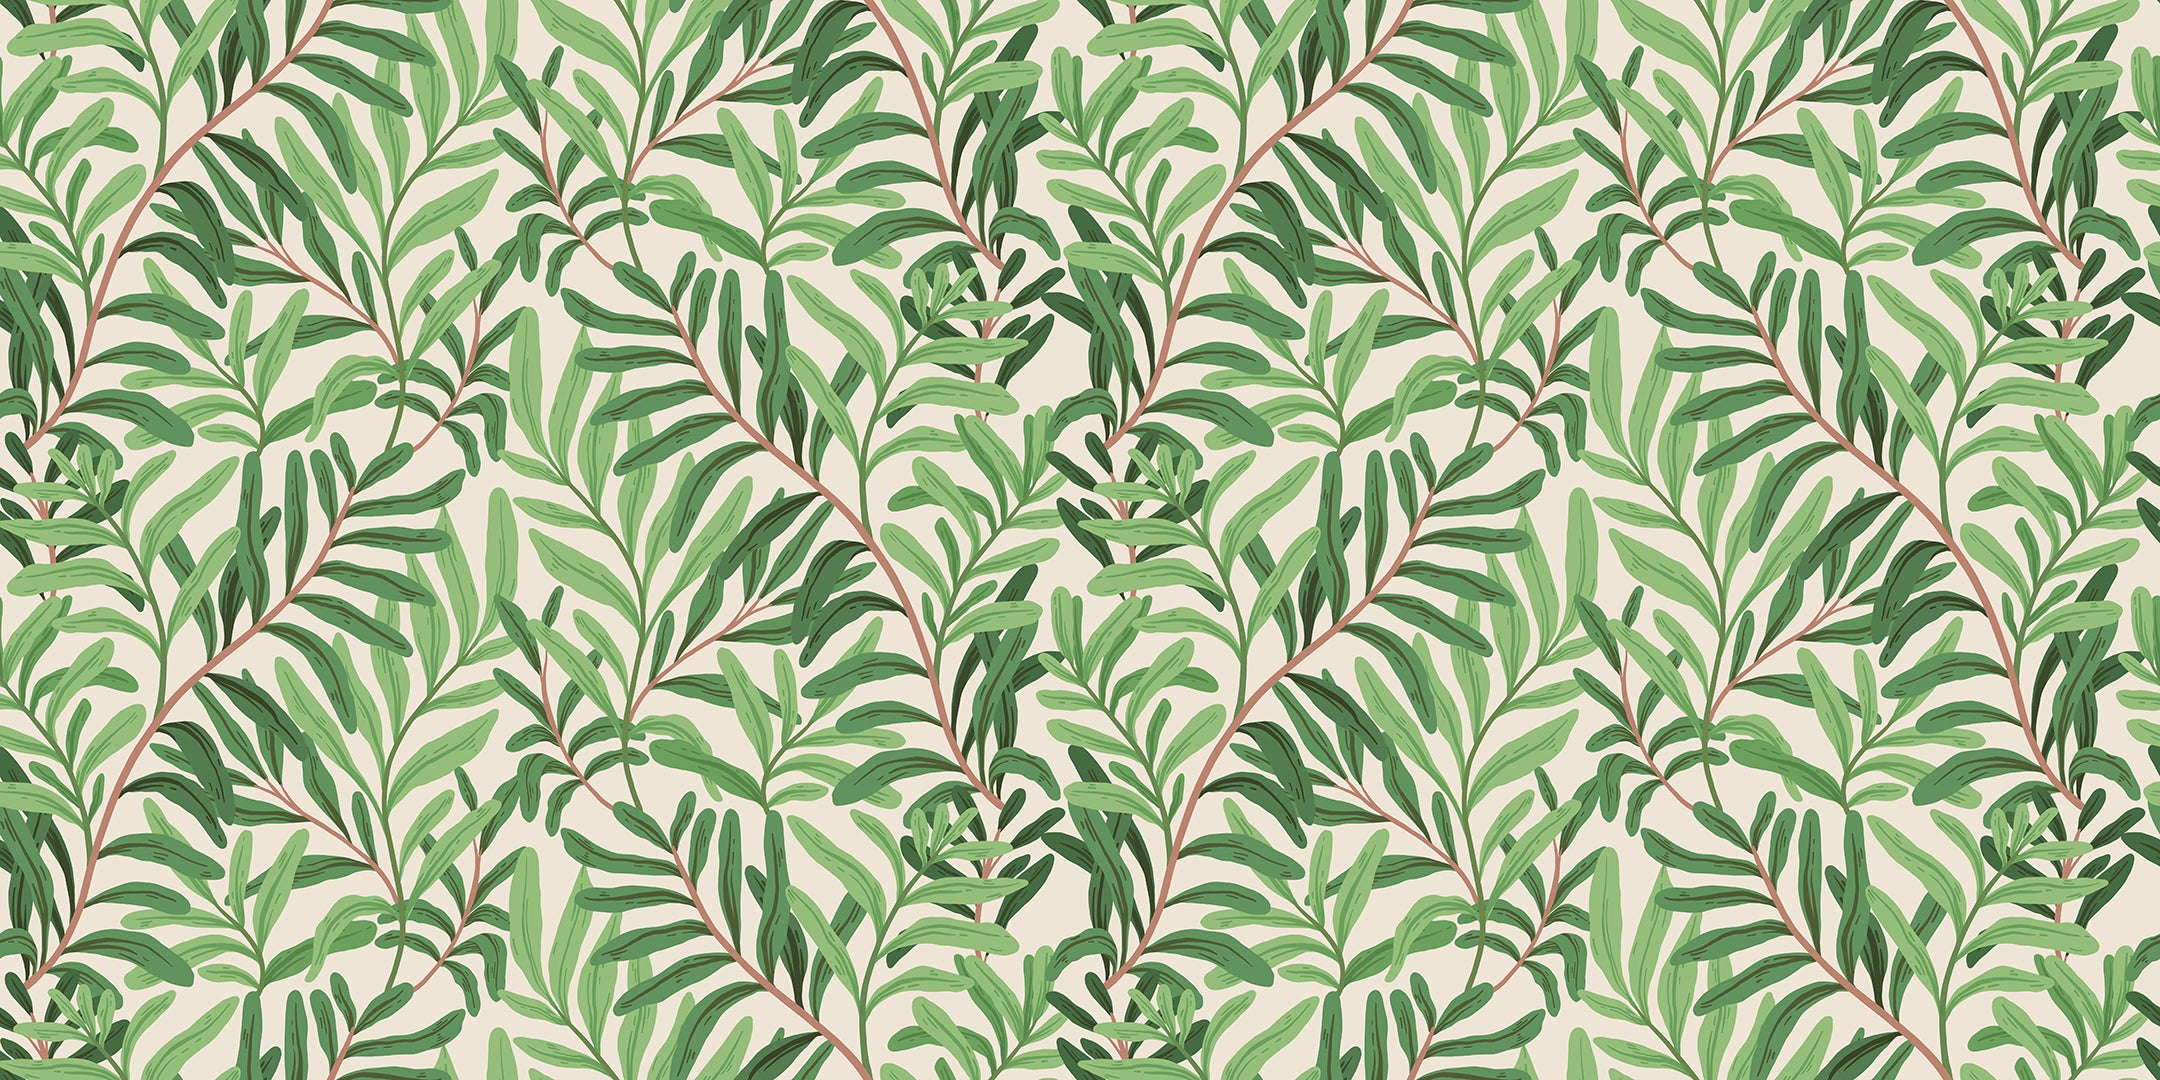 A botanical wallpaper design featuring lush green leaves on intertwining branches. The pattern creates a dense and vibrant look, set against a light beige background, bringing the essence of nature indoors.